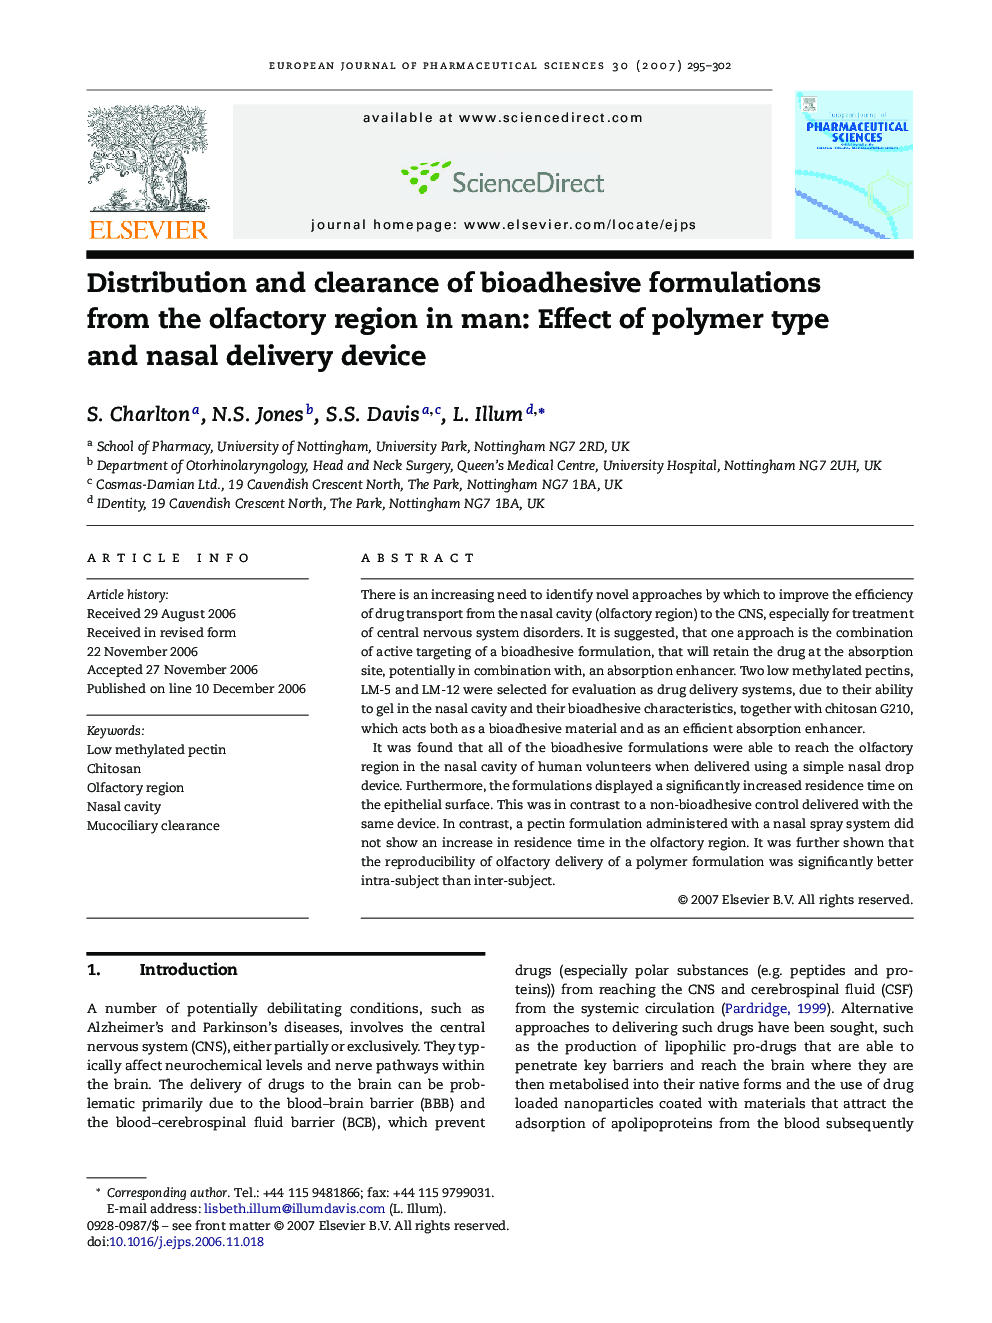 Distribution and clearance of bioadhesive formulations from the olfactory region in man: Effect of polymer type and nasal delivery device